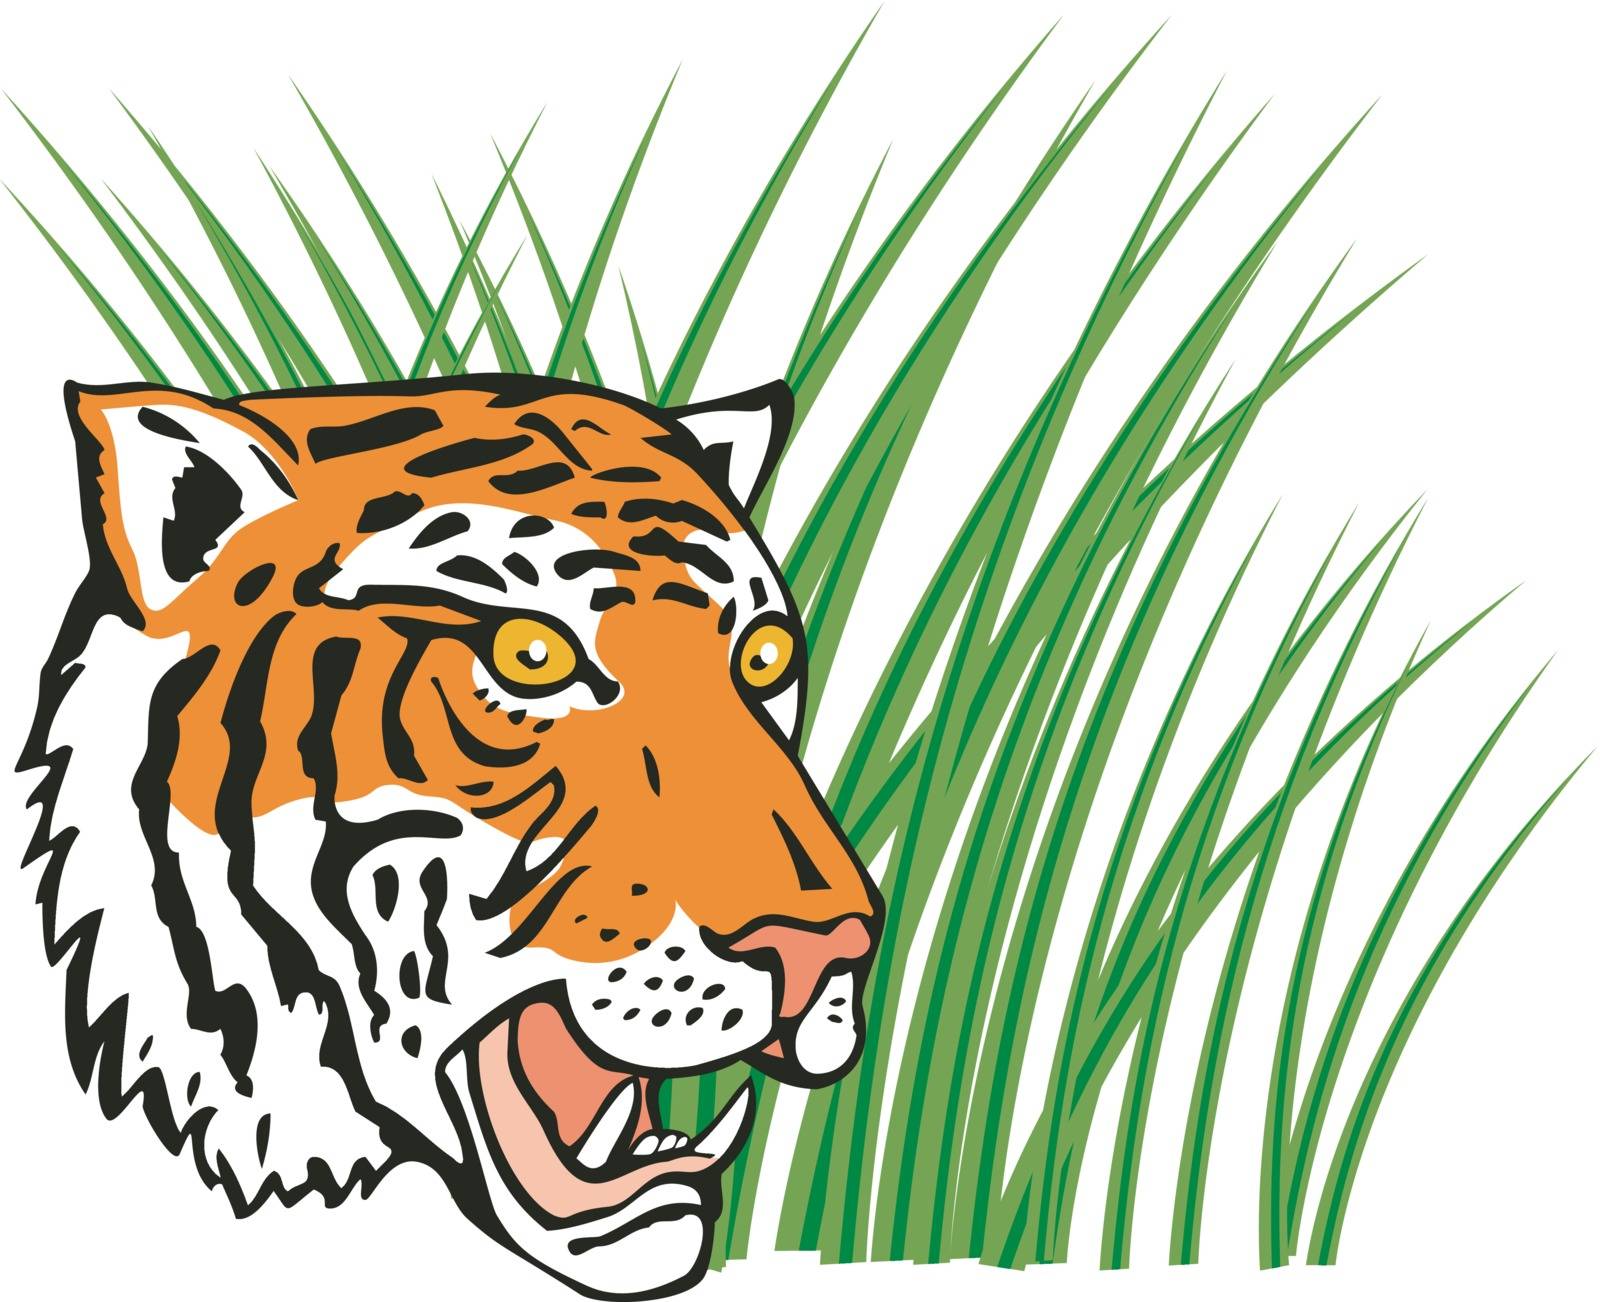 Illustration of a tiger head with long grass in the background done in retro style. 